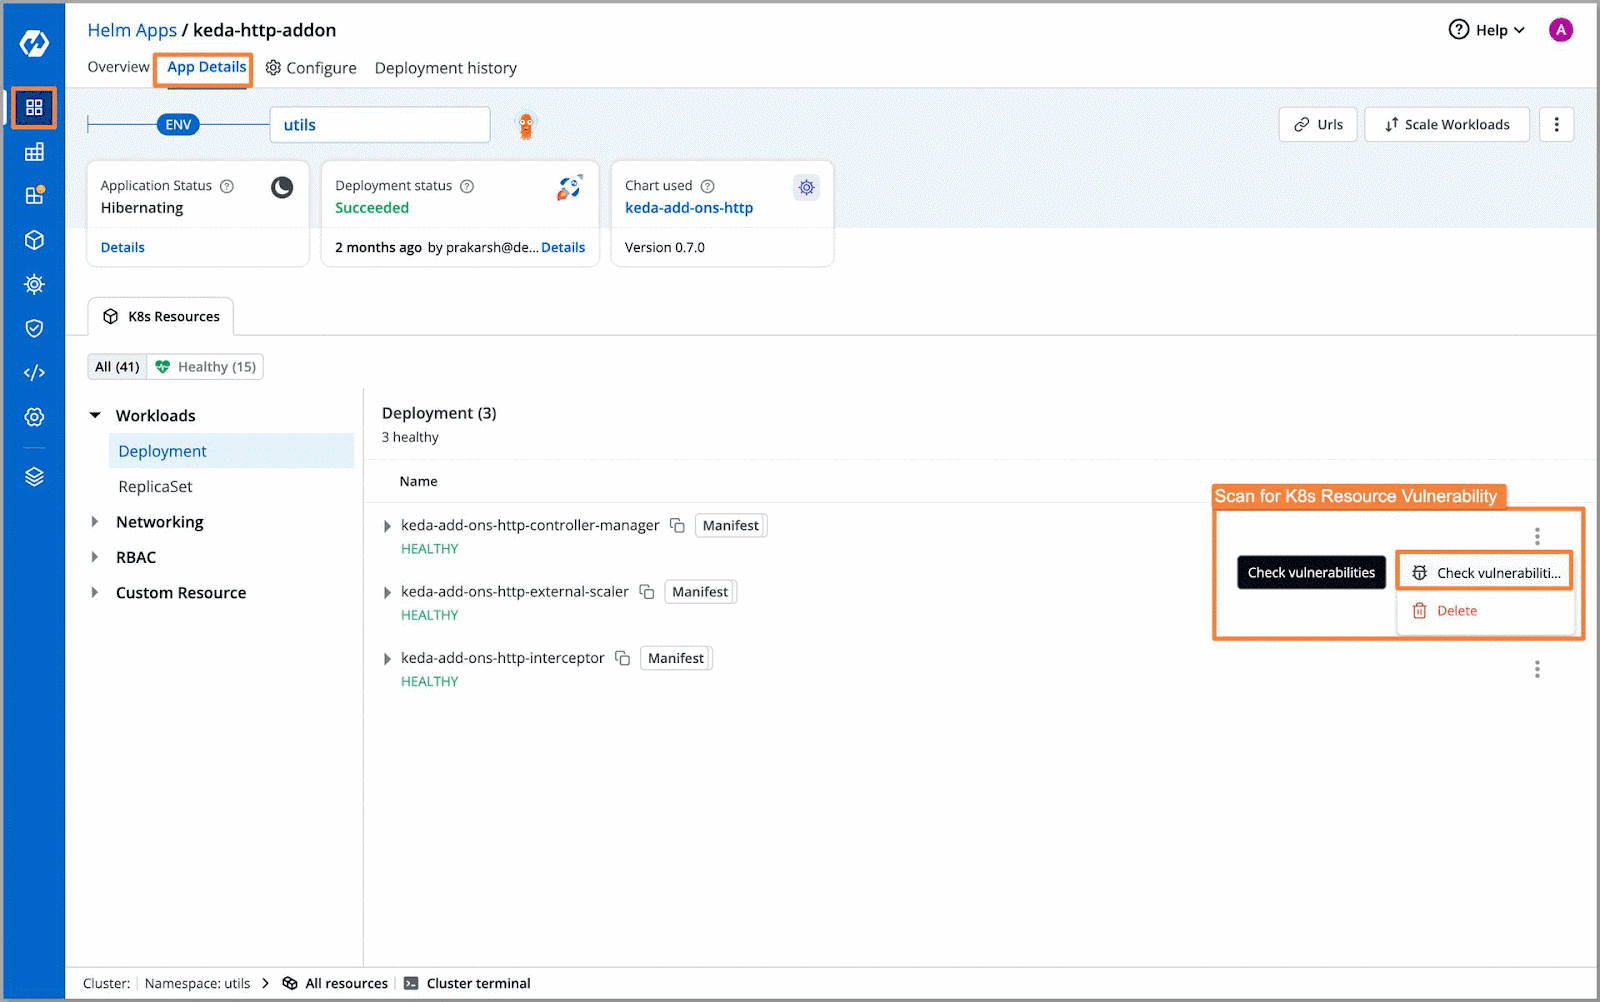 GIF showing screenshot on clicking "App details" and check vulnerabilities for scanning kubernetes resource vulnerabilities